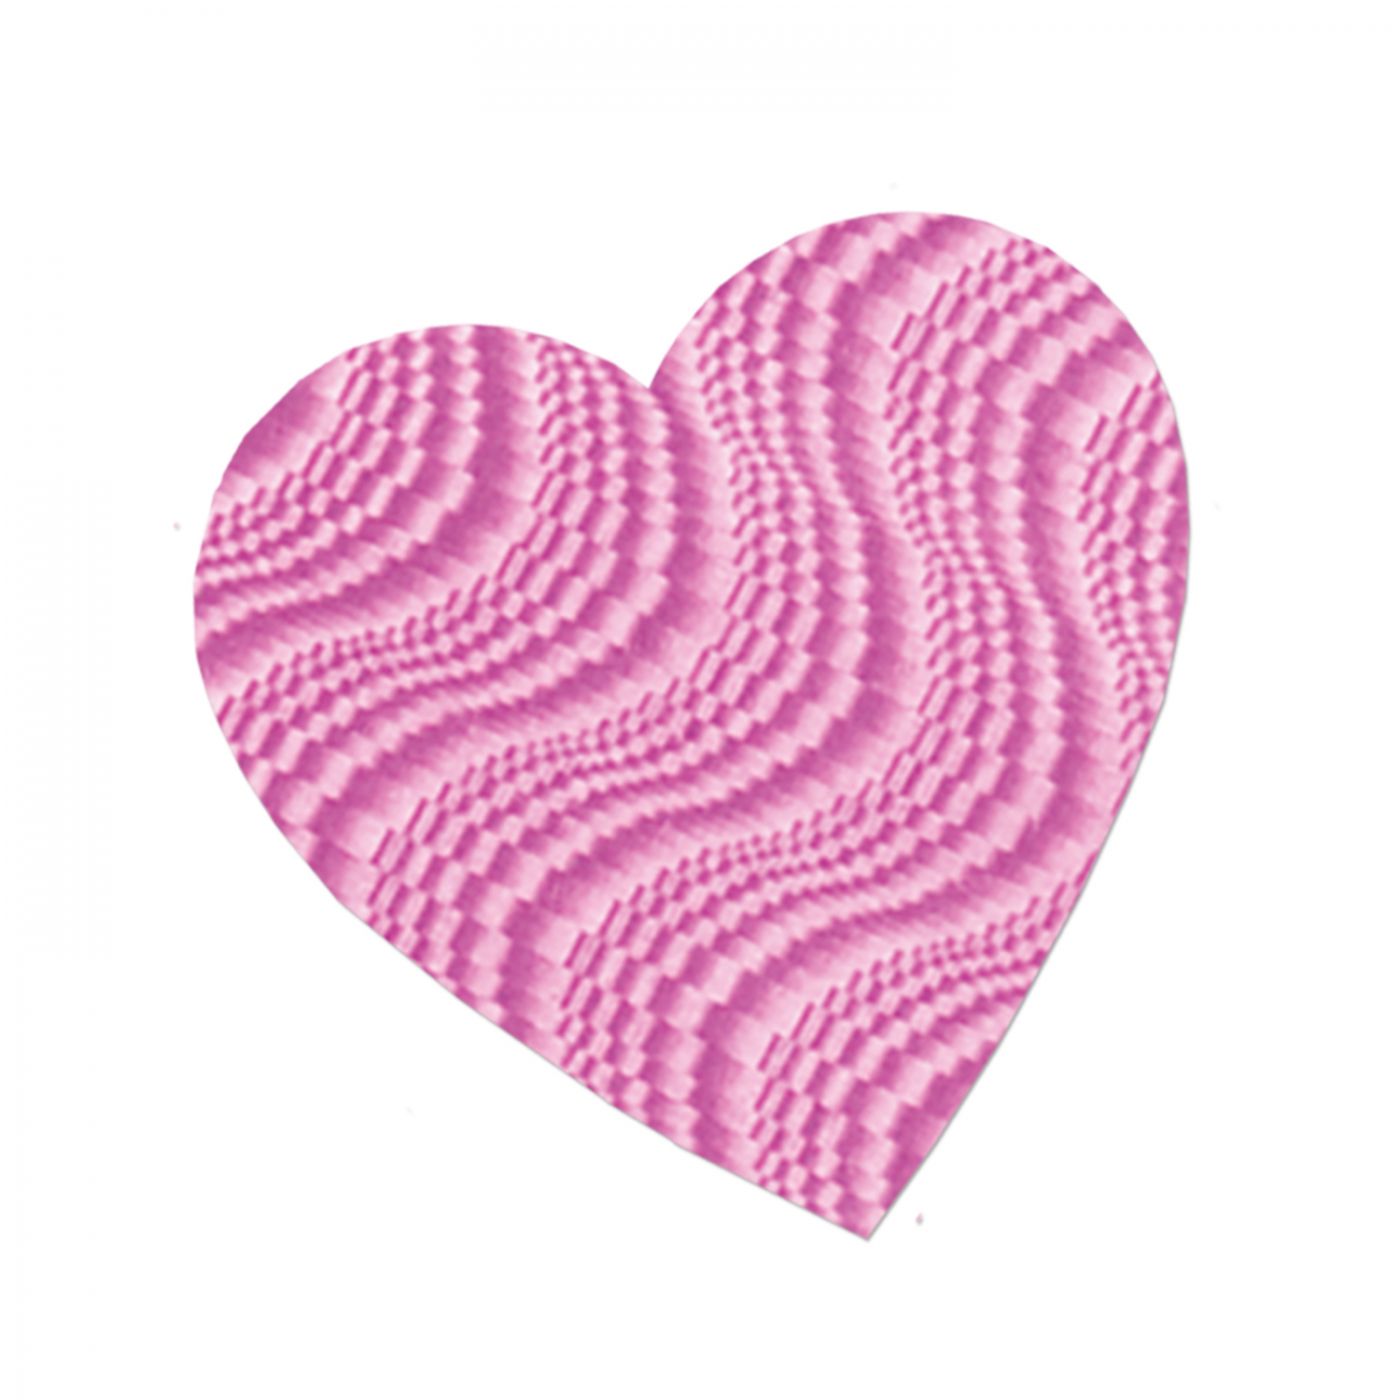 Embossed Foil Heart Cutout (36) image